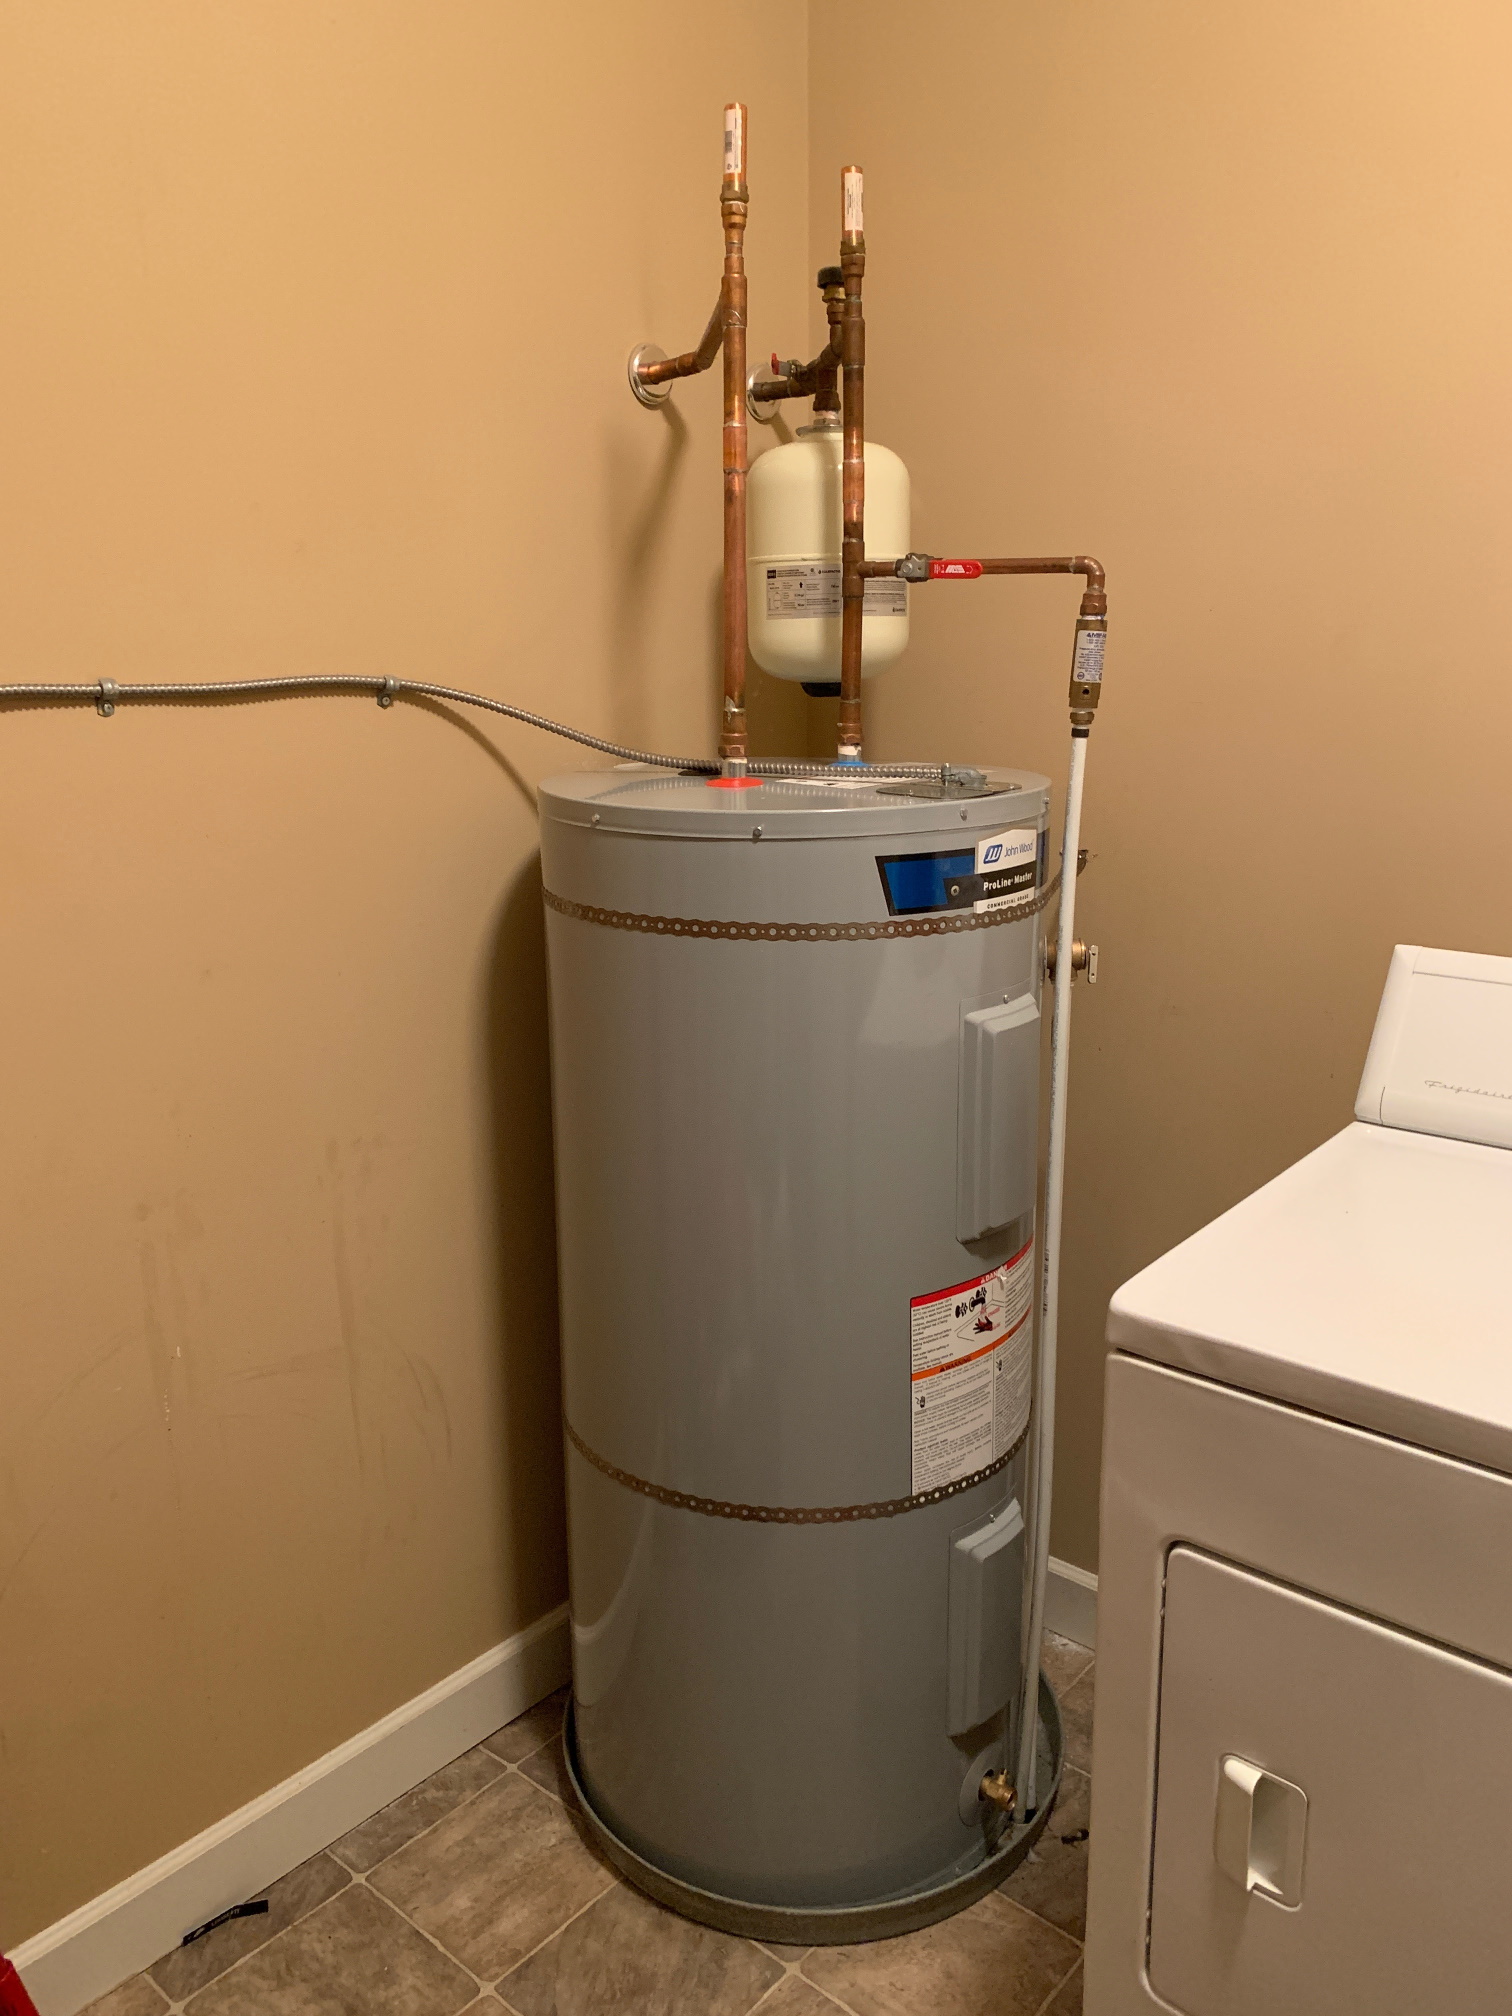 Telltale Signs That It's Time for a New Hot Water Heater